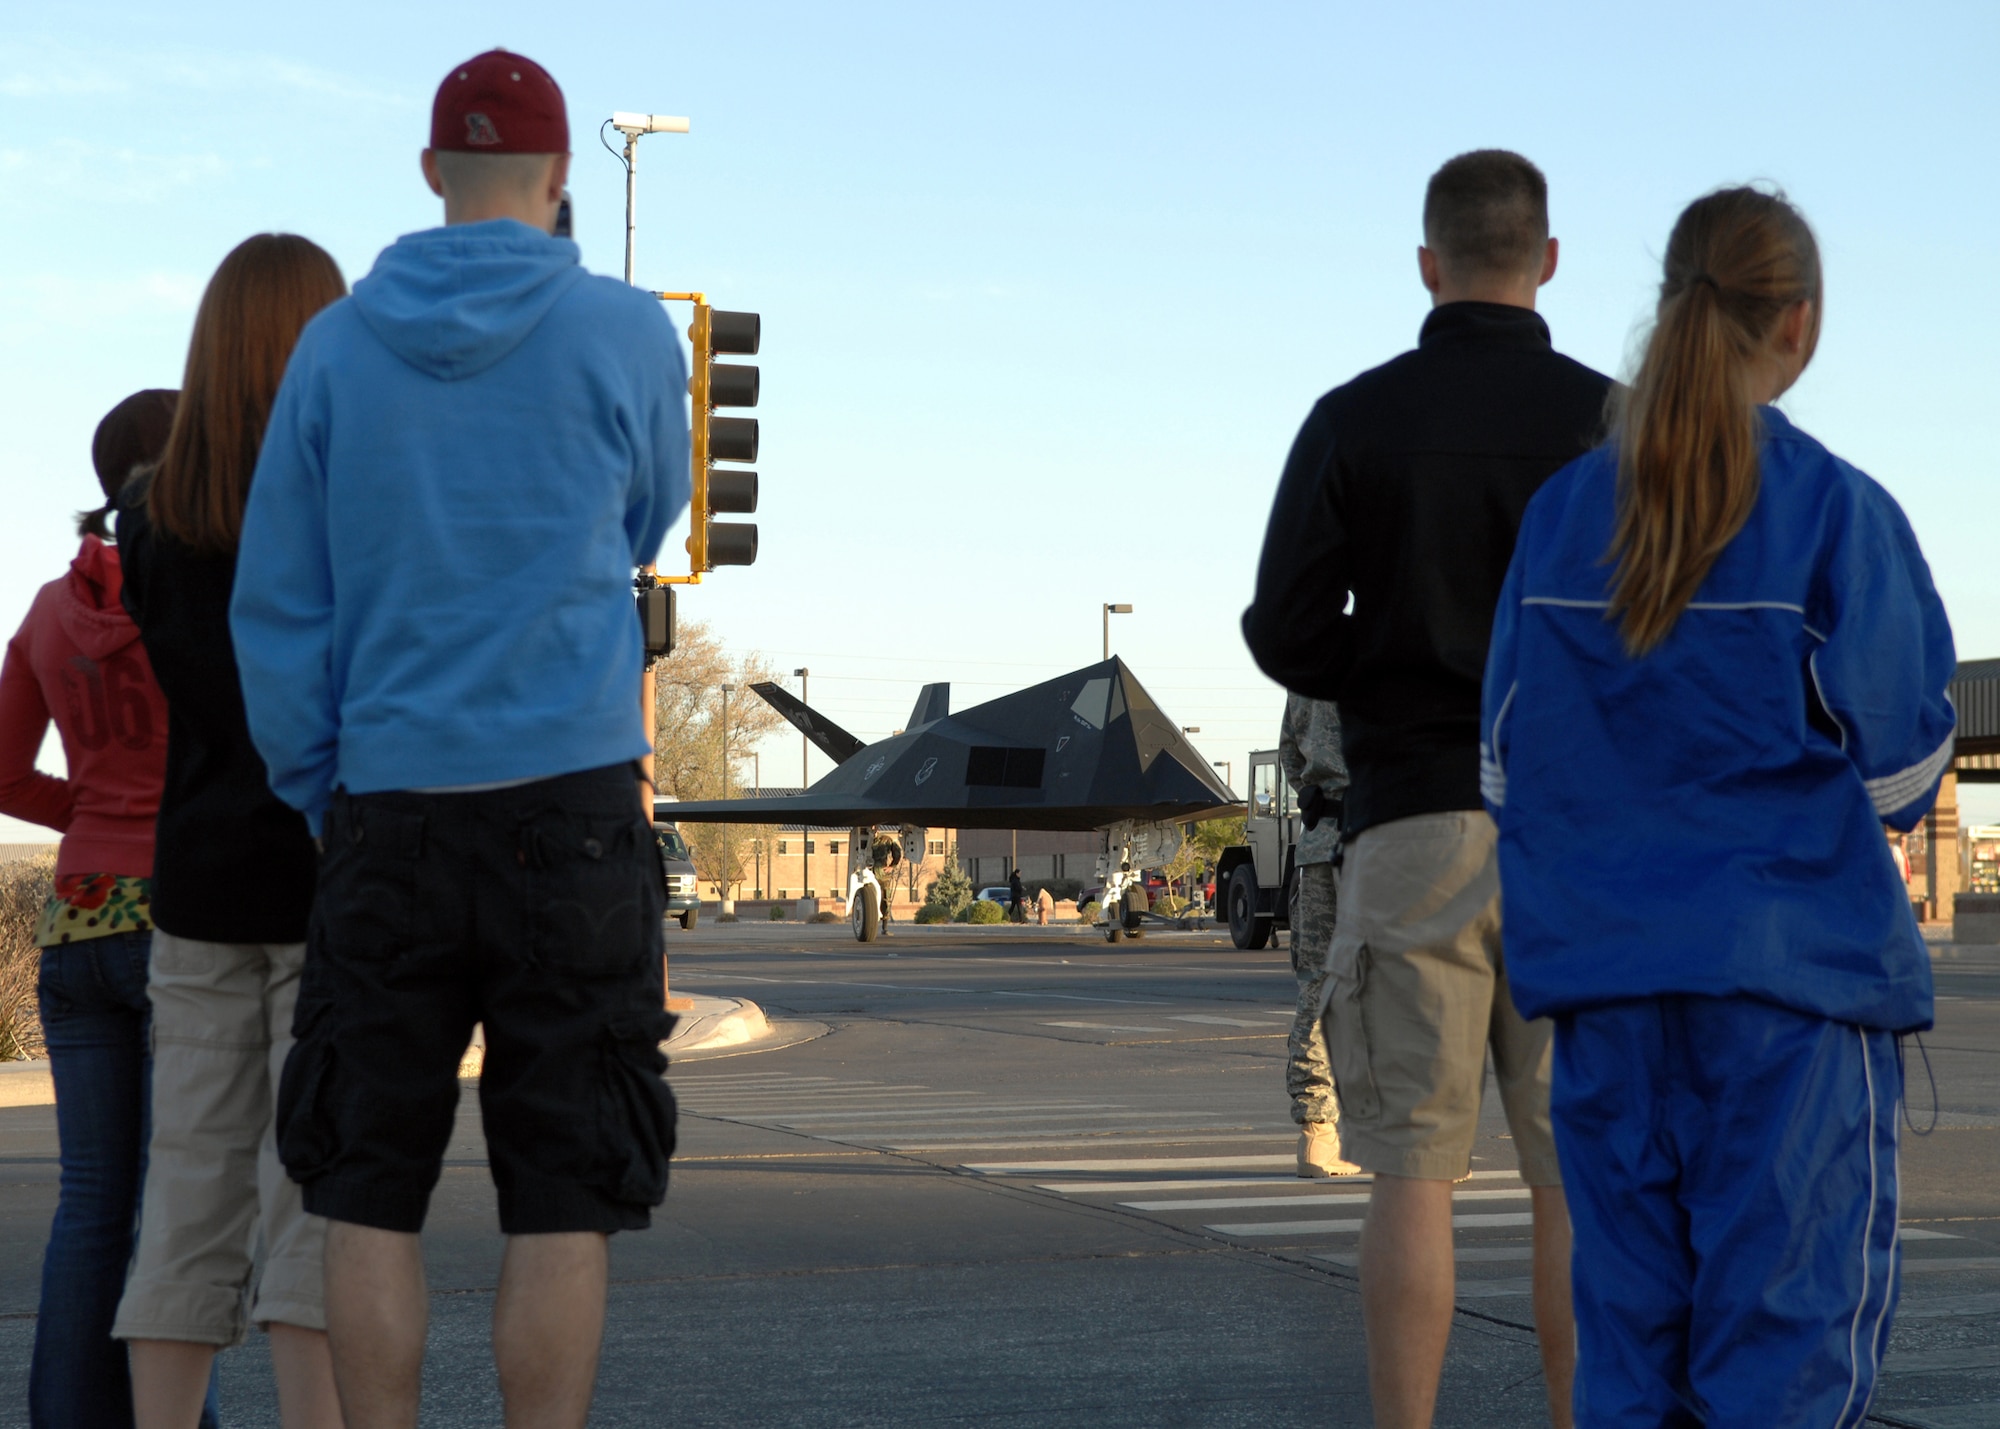 HOLLOMAN AIR FORCE BASE, N.M. -- Bystanders stare at sight they don?t see everyday; an F-117A being towed down the street here April 5. The F-117A was being pulled by a tow tractor to be put on display at the Heritage Park in preparation for its retirement. (U.S. Air Force photo by Airman Sondra M. Wieseler)